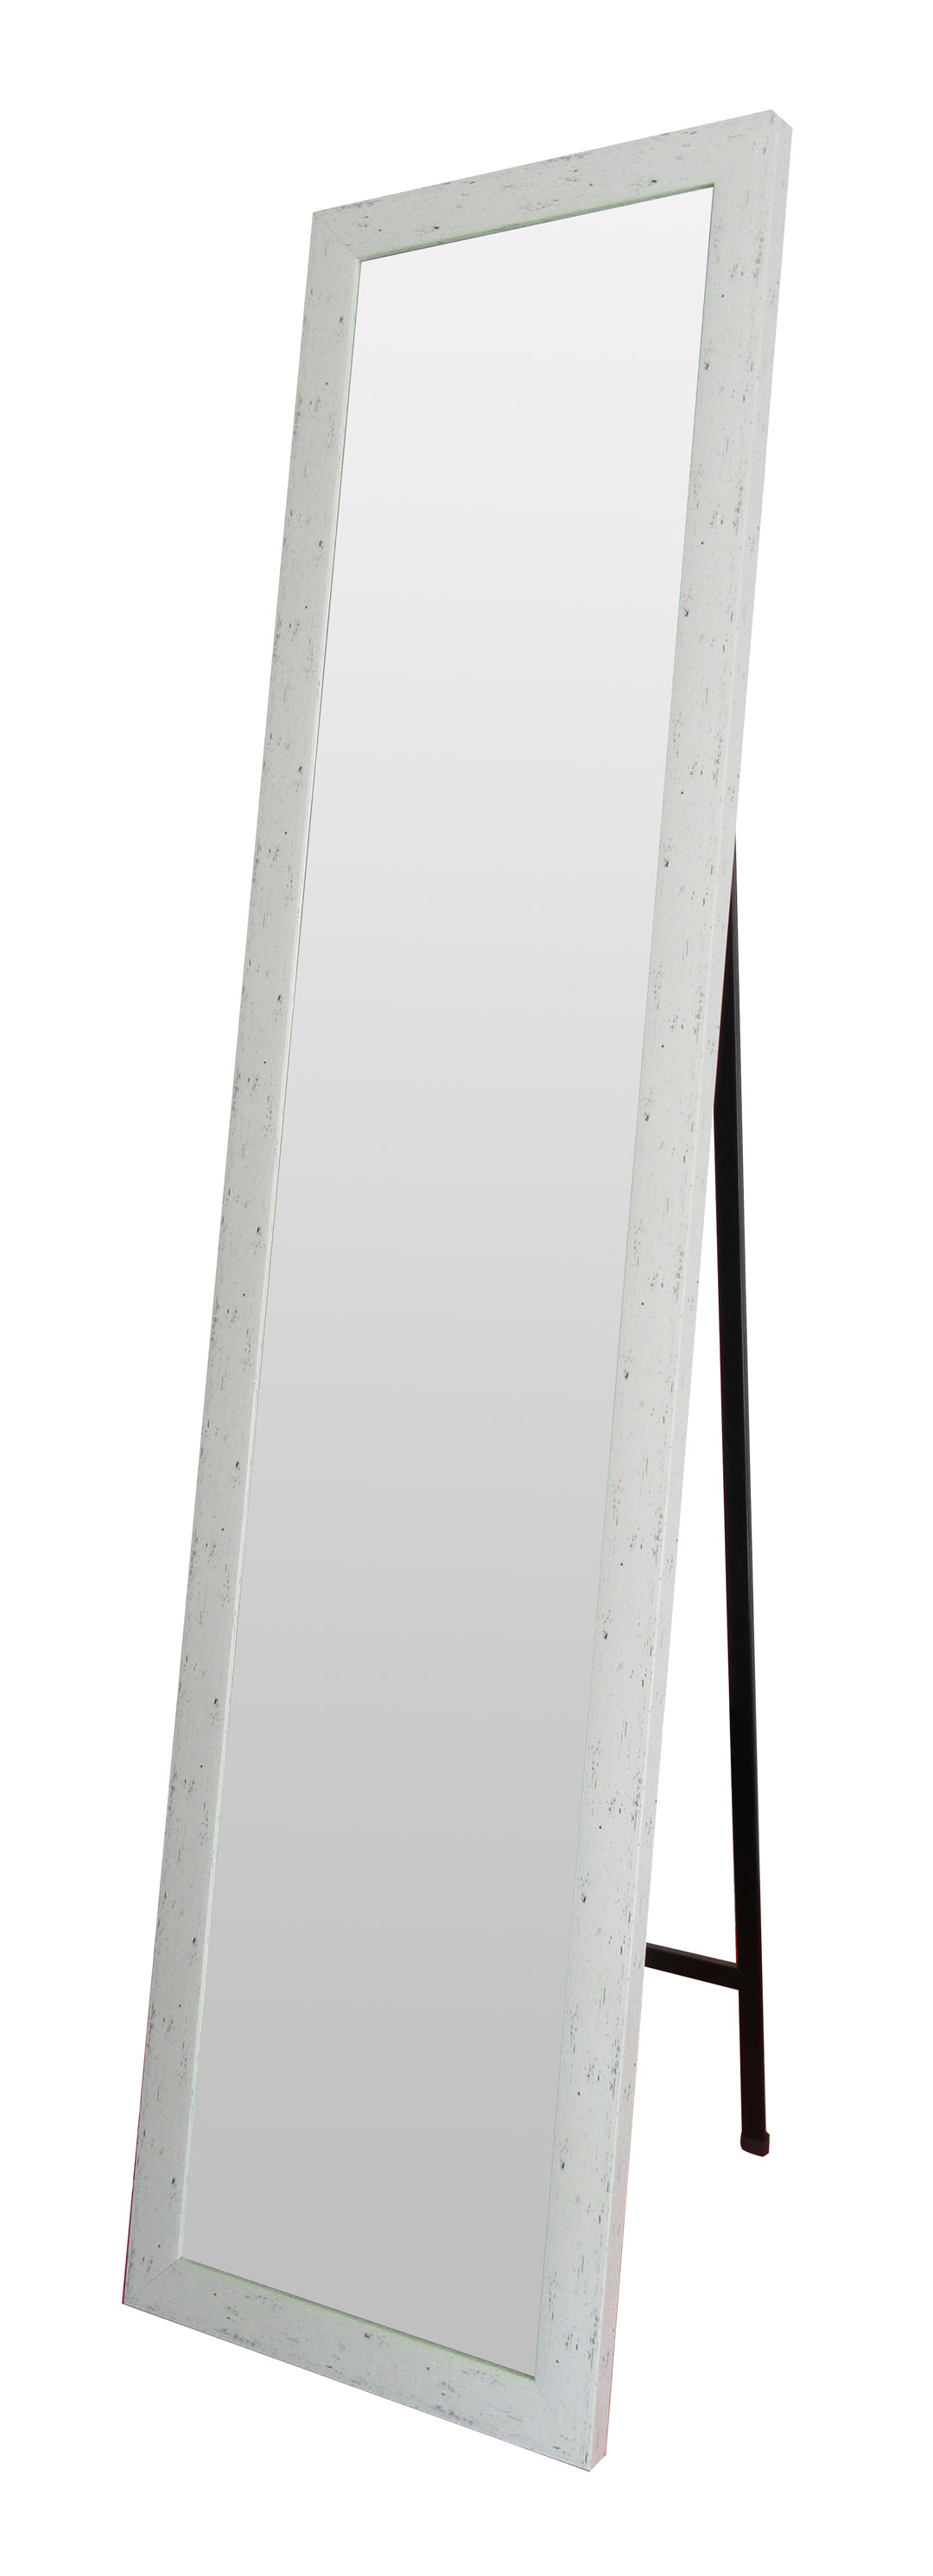 SUPERLIVING FULL BODY MIRROR WITH STAND 30 X 150CM 3 COLORS